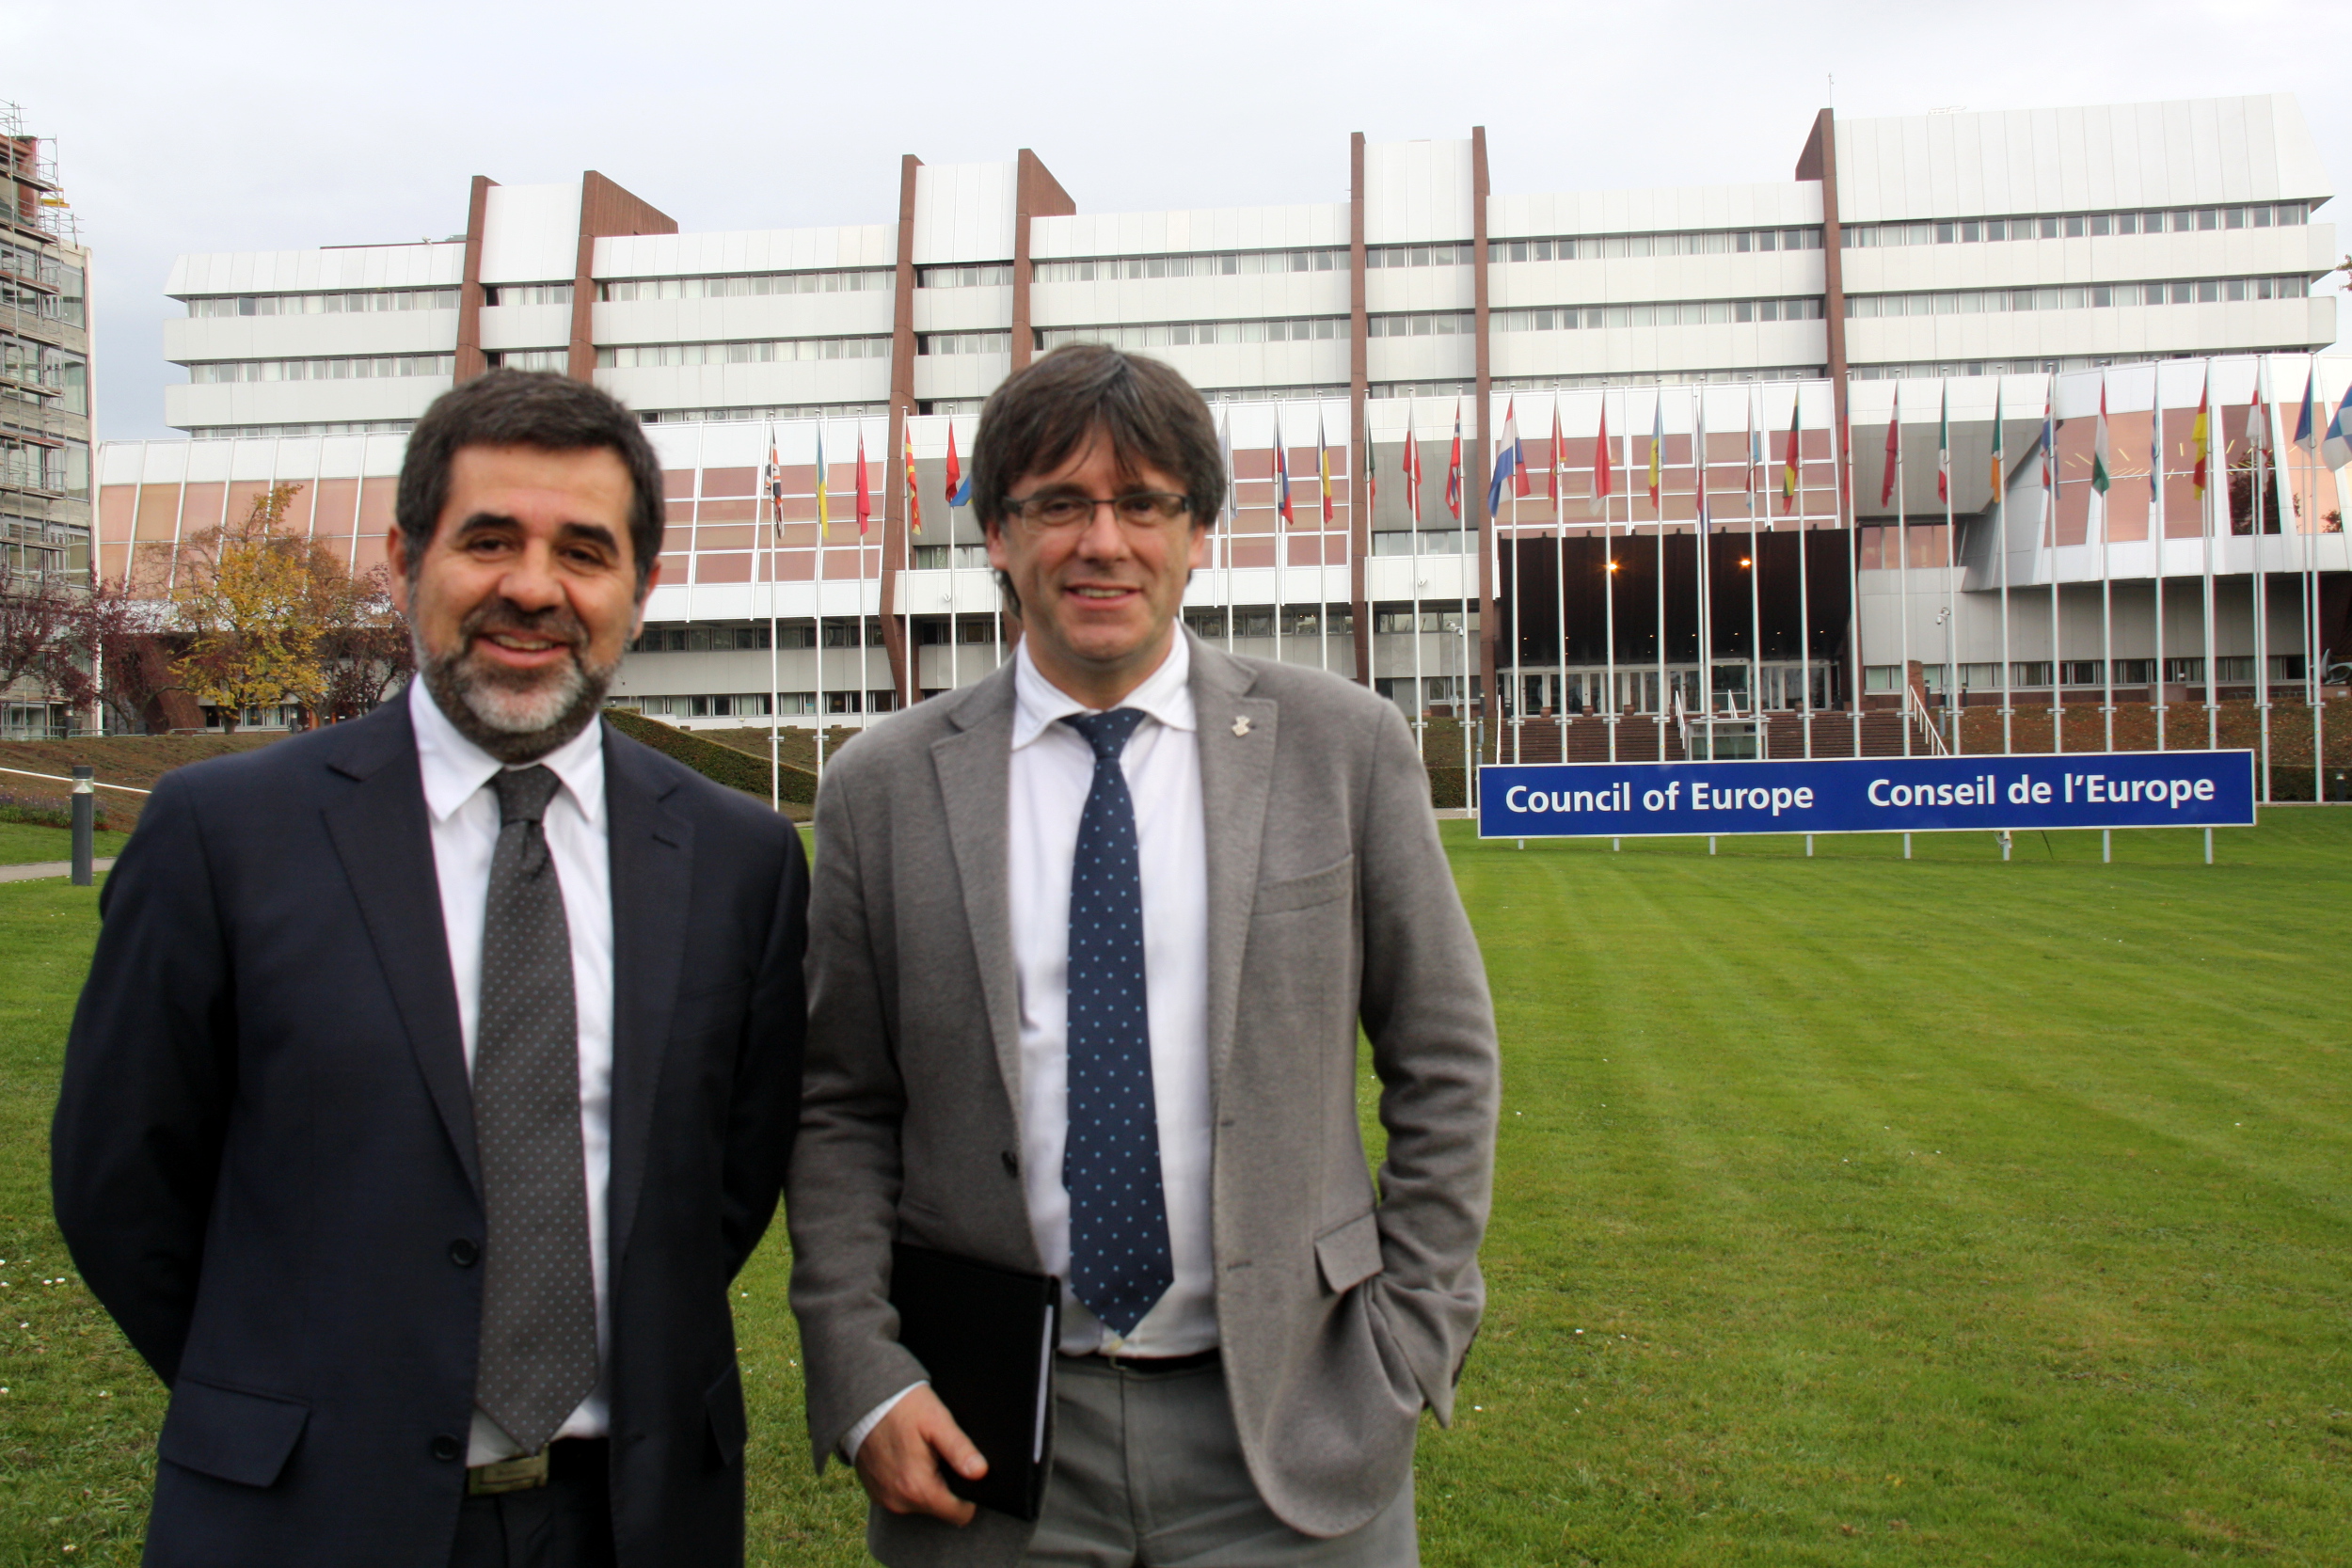 Catalan National Assembly's president, Jordi Sànchez, and the Association of Municipalities for Independence's president, Carles Puigdemont at the Council of Europe, in Strasbourg (by ACN)